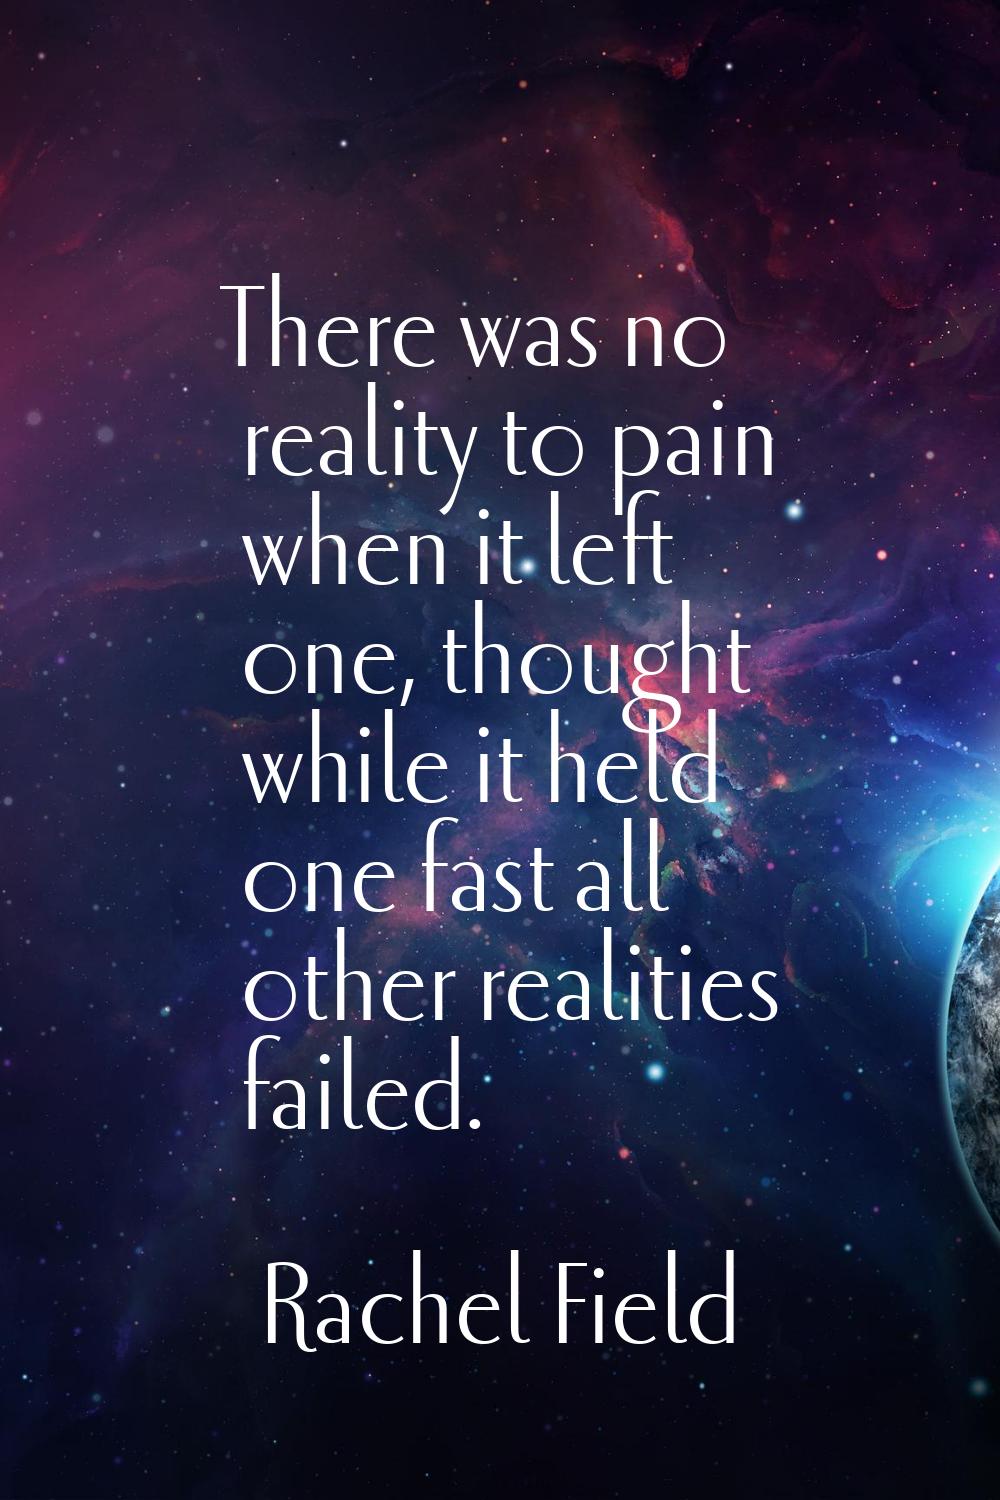 There was no reality to pain when it left one, thought while it held one fast all other realities f